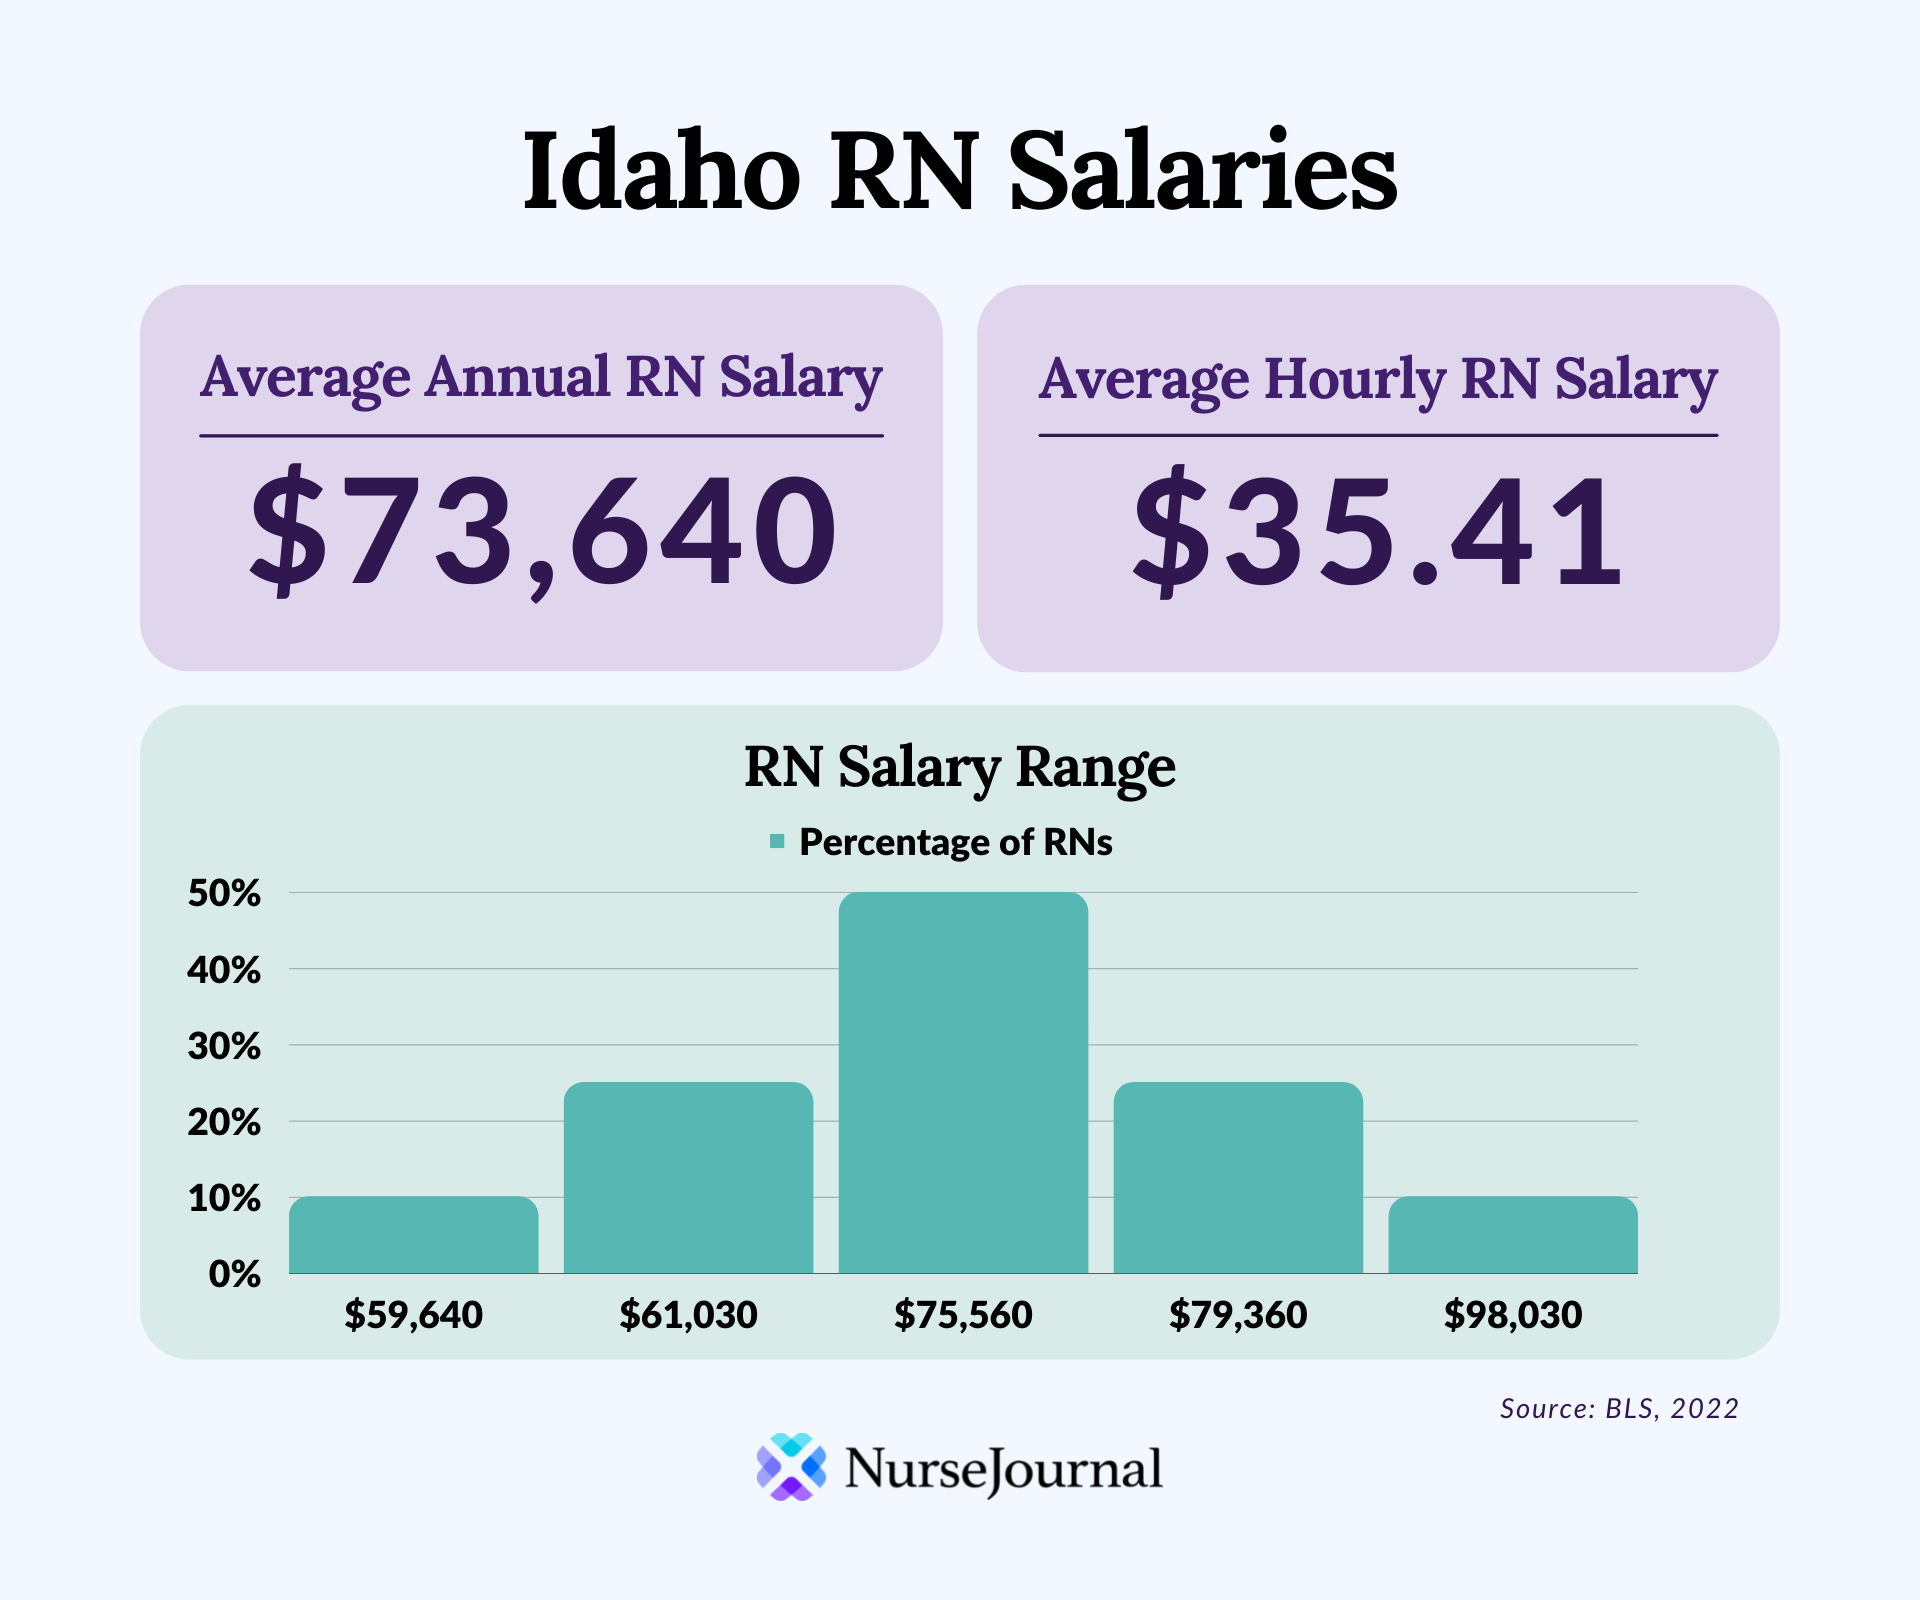 Infographic of registered nursing salary data in Idaho. The average annual RN salary is $73,640. The average hourly RN salary is $35.41. Average RN salaries range from $59,640 among the bottom 10th percentile of earners to $98,030 among the top 90th percentile of earners.